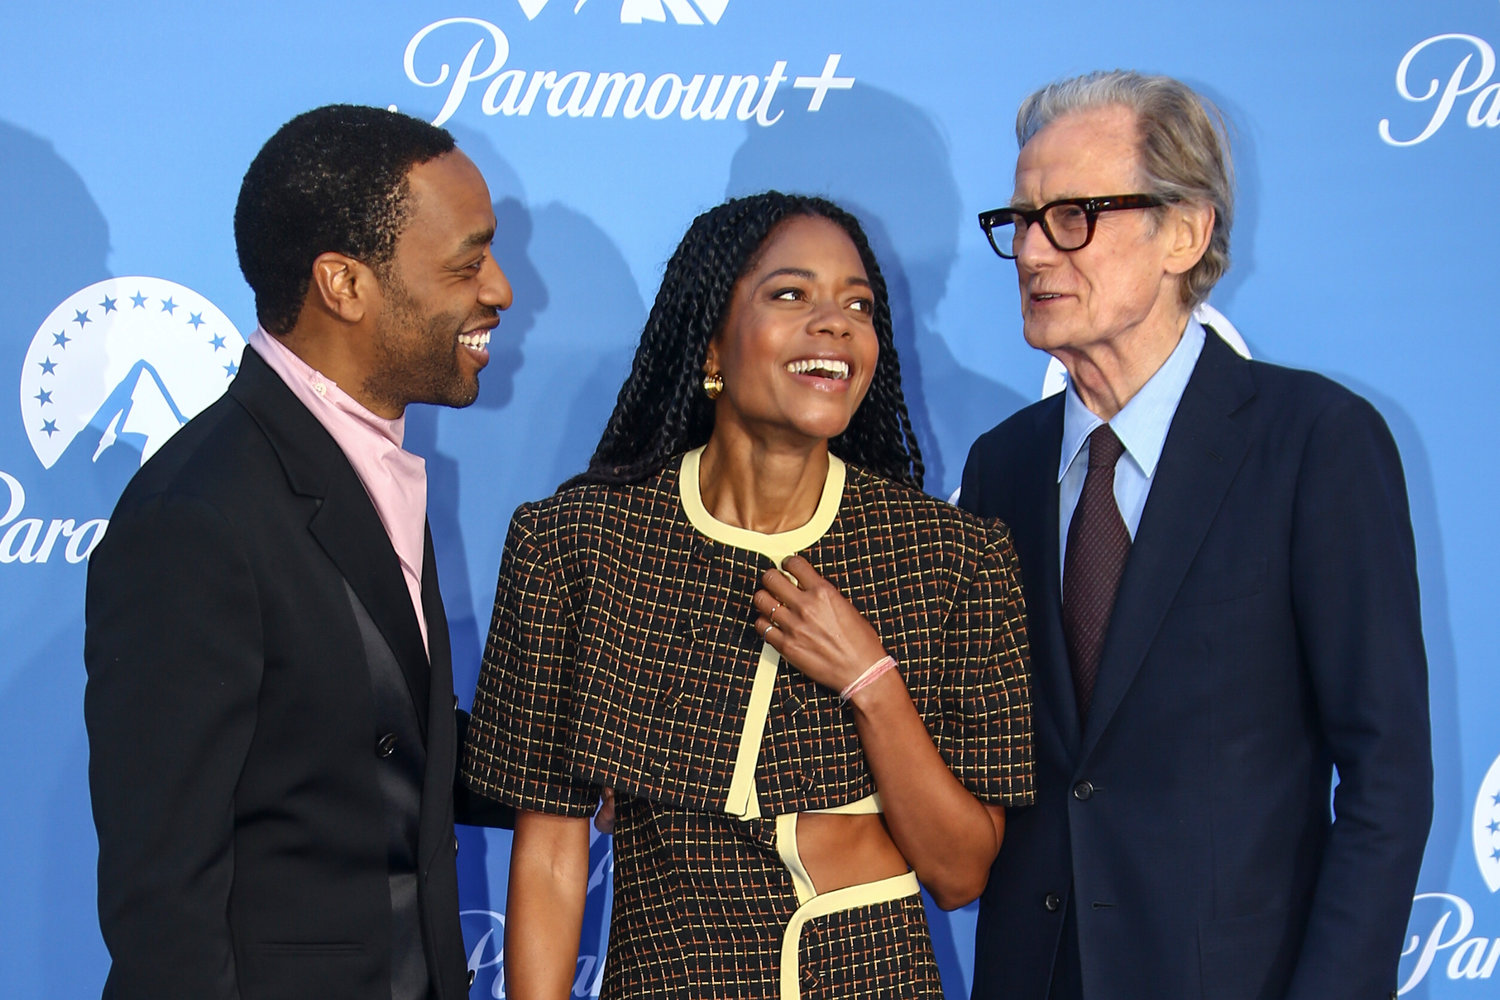 Chiwetel Ejiofor, from left, Naomie Harris and Bill Nighy pose for photographers upon arrival at the UK launch of the streaming site Paramount +, in London, Monday, June 20, 2022. (Photo by Joel C Ryan/Invision/AP)